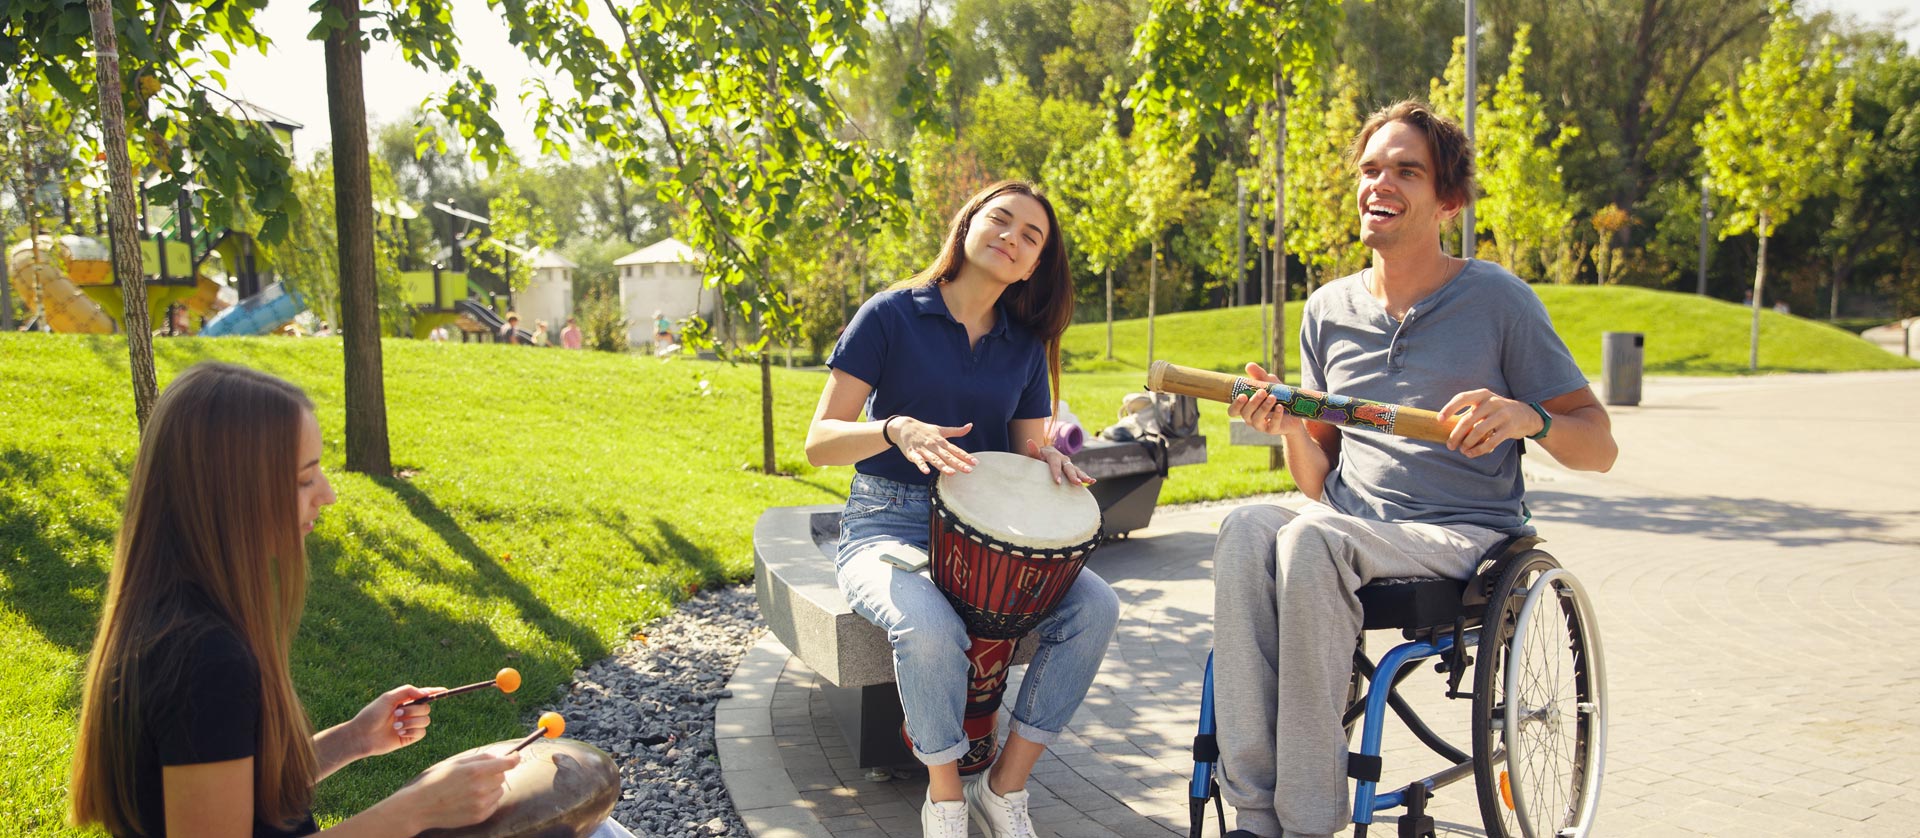 Two women playing hide drums with a man in a wheelchair who is playing a maraca-style instrument.